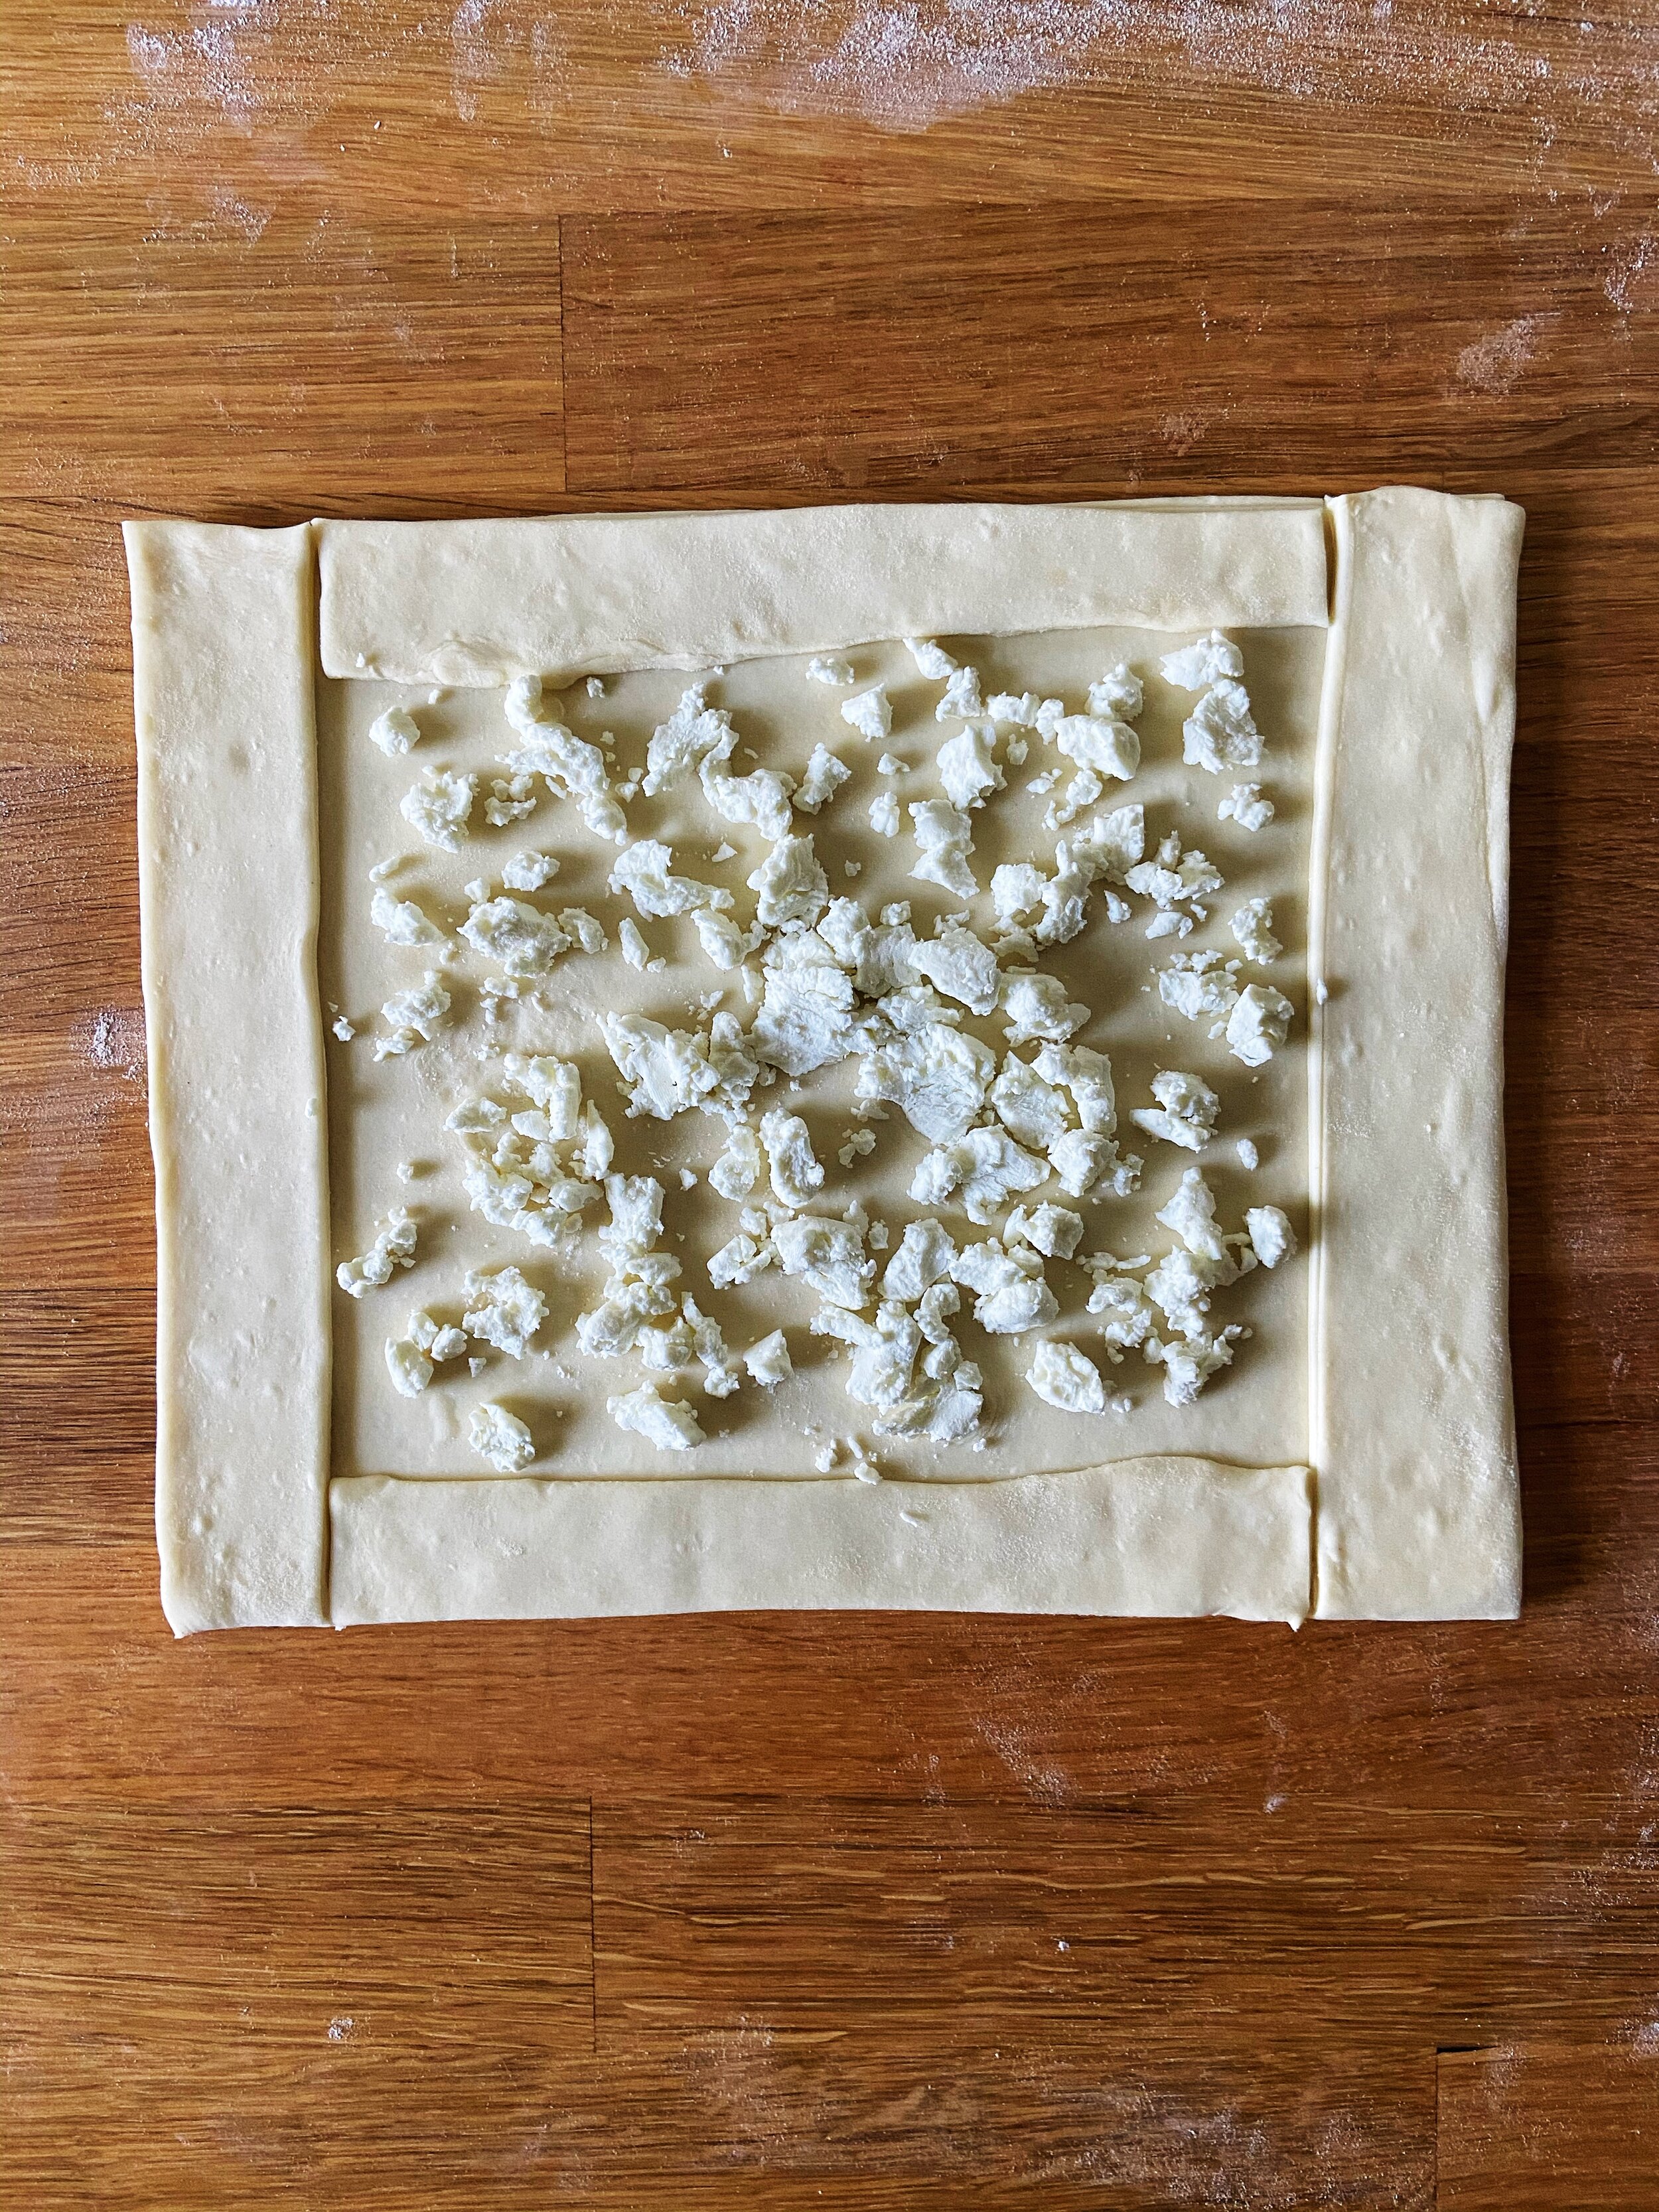 sprinkle goat cheese over the center of the pastry